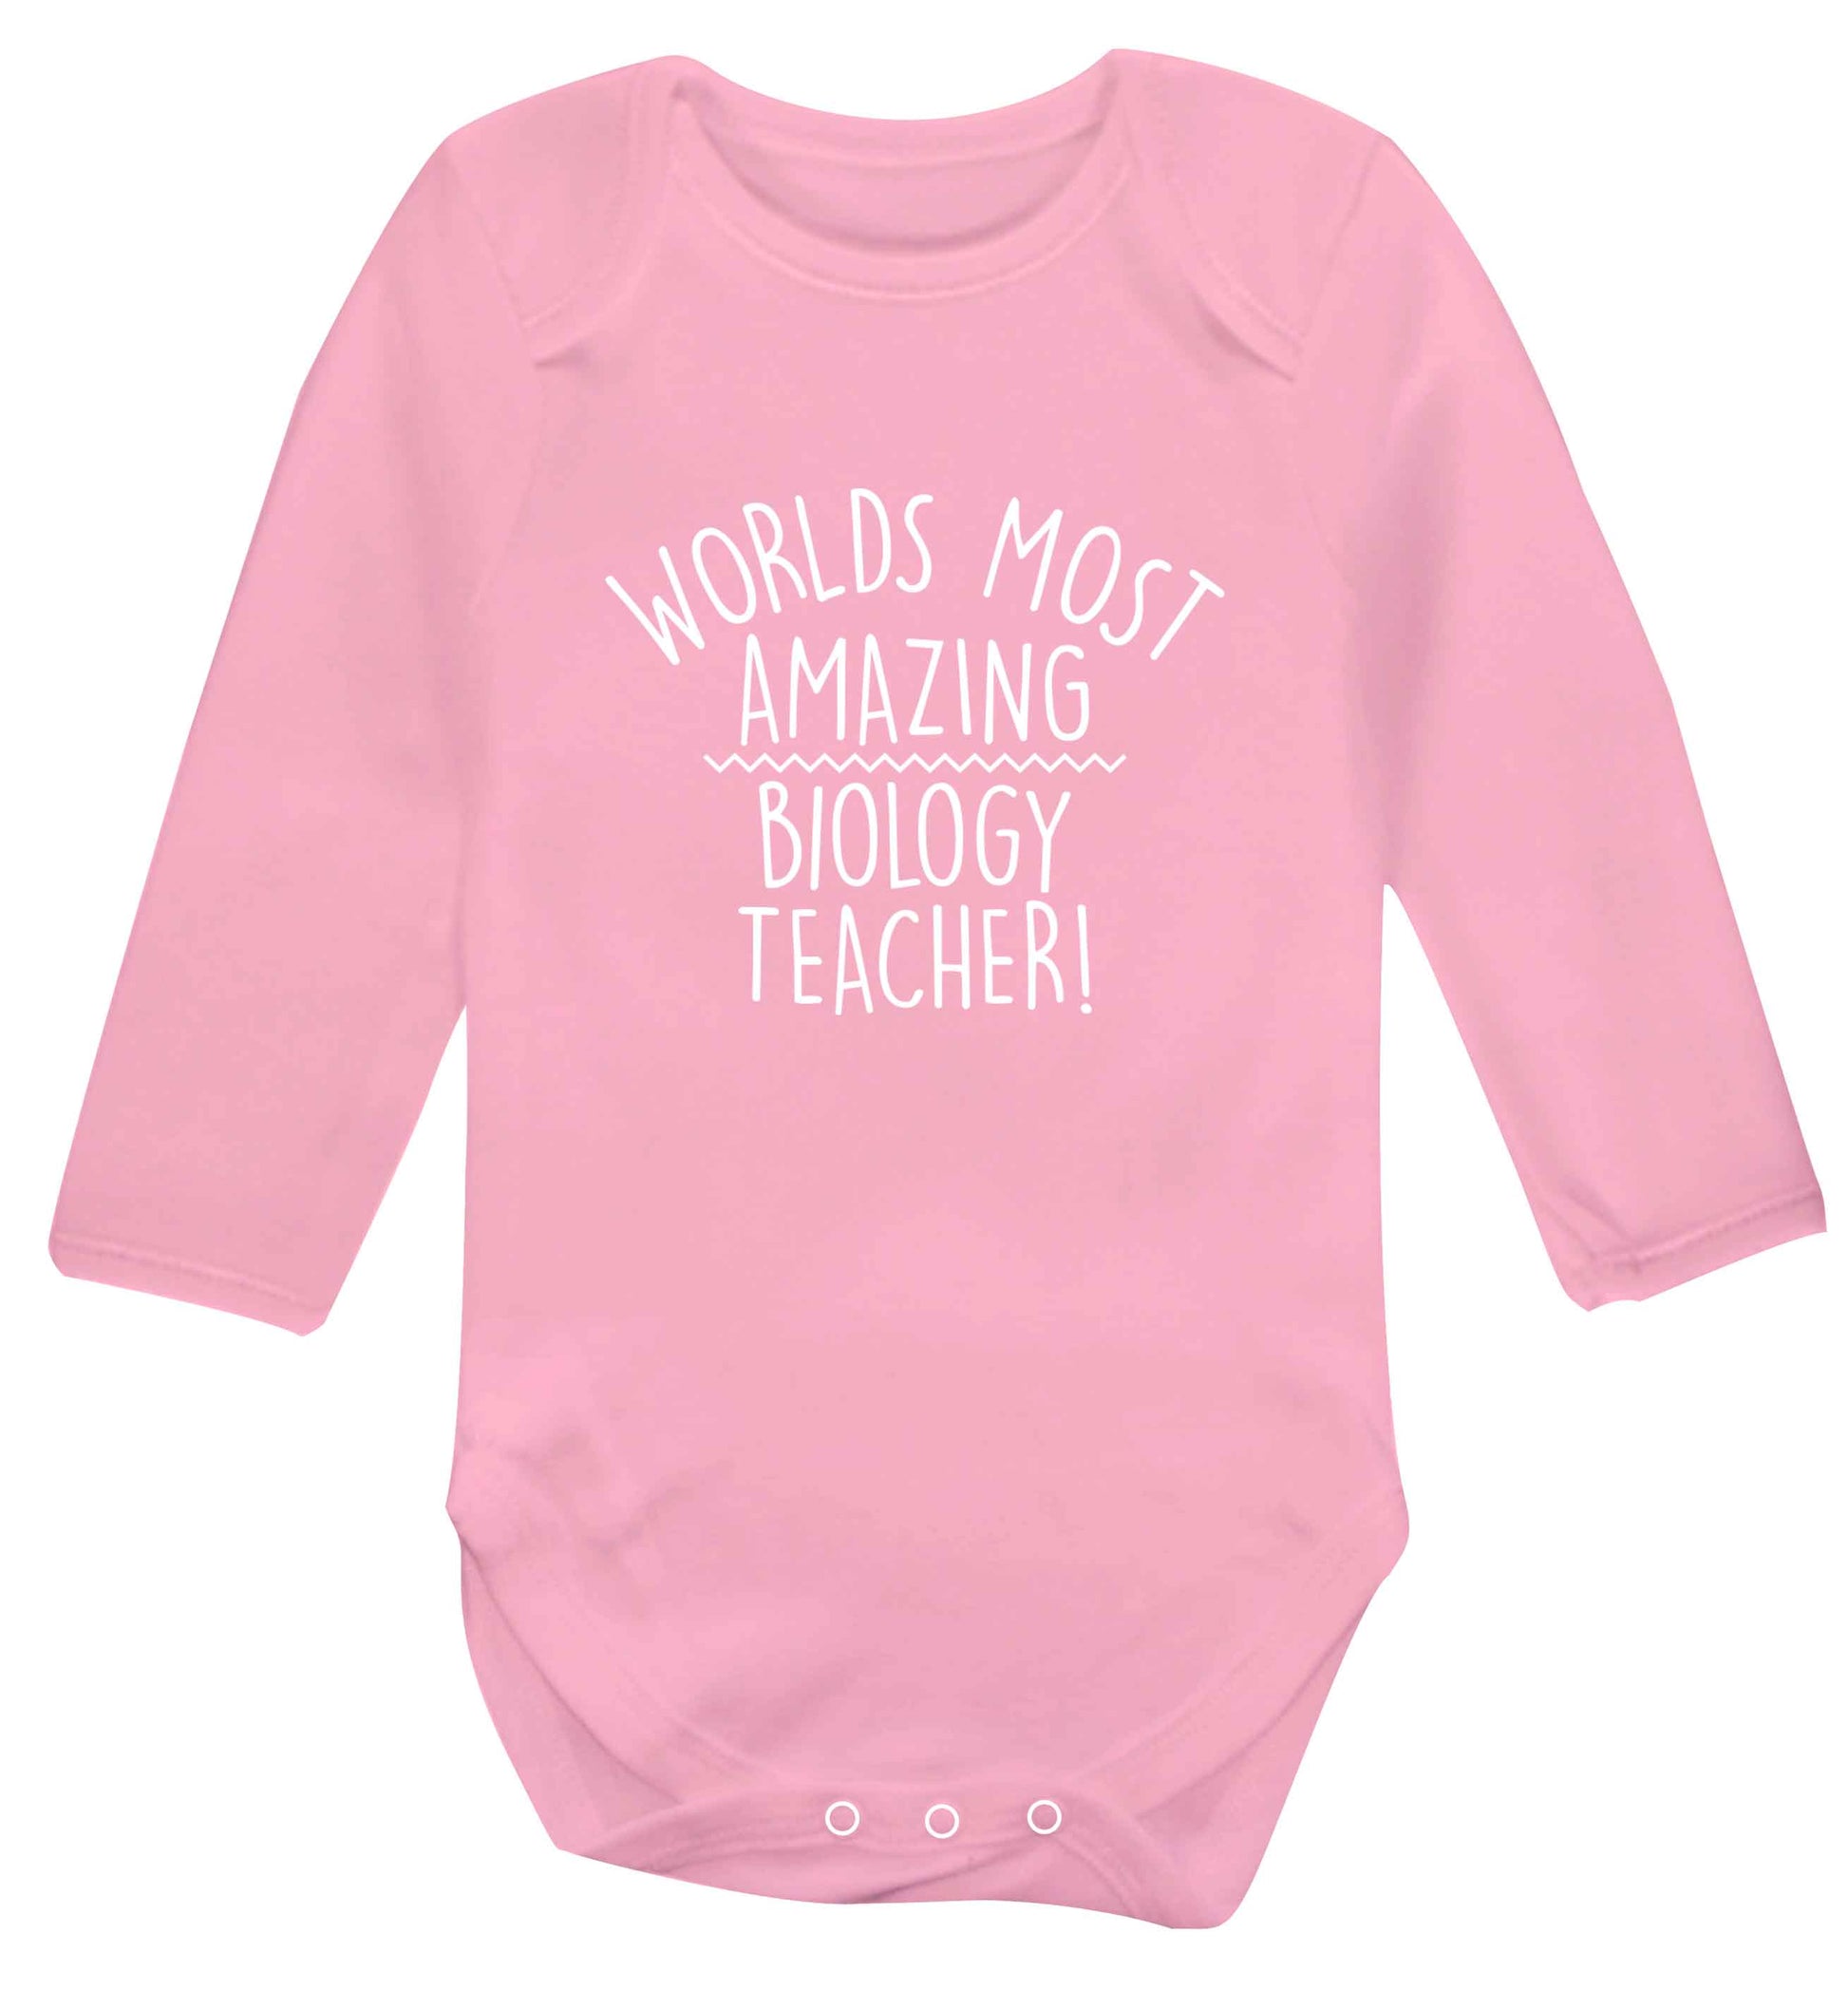 Worlds most amazing biology teacher baby vest long sleeved pale pink 6-12 months